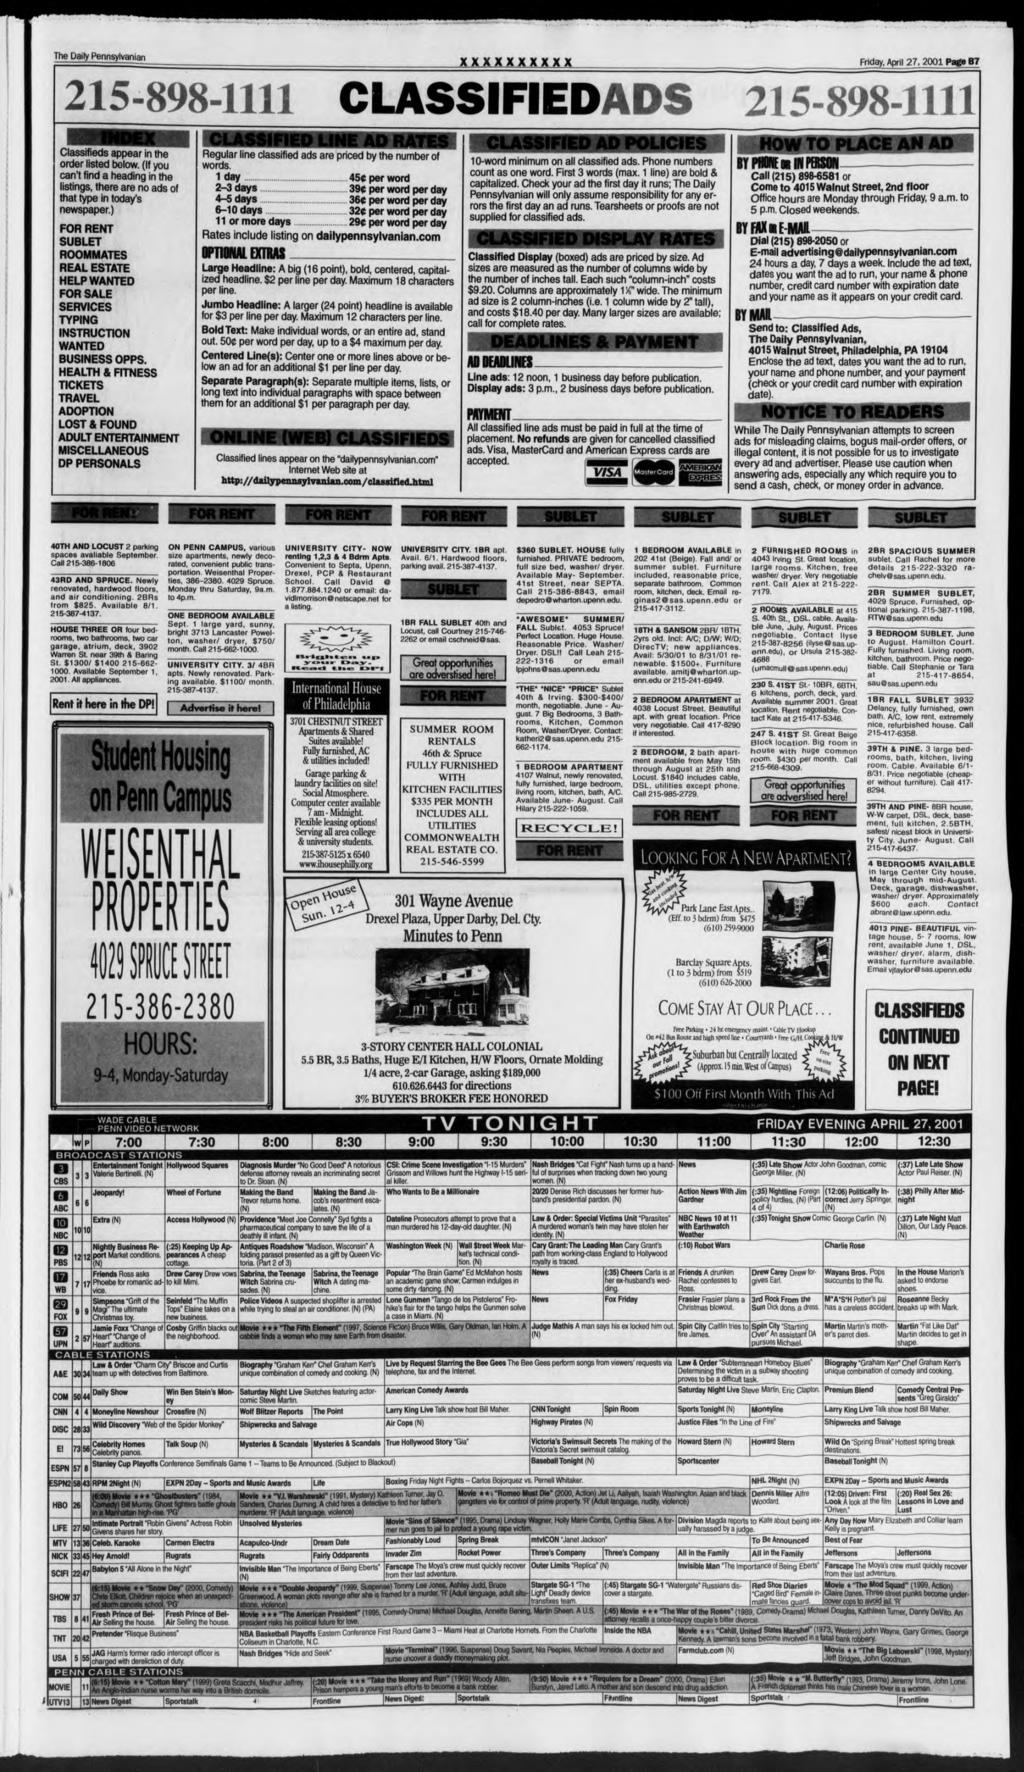 xxxxxxxxxx day, April. 20 Page B7 215-89841 CLASSIFIEDADS 215-898- Classifieds appear in the order listed below.